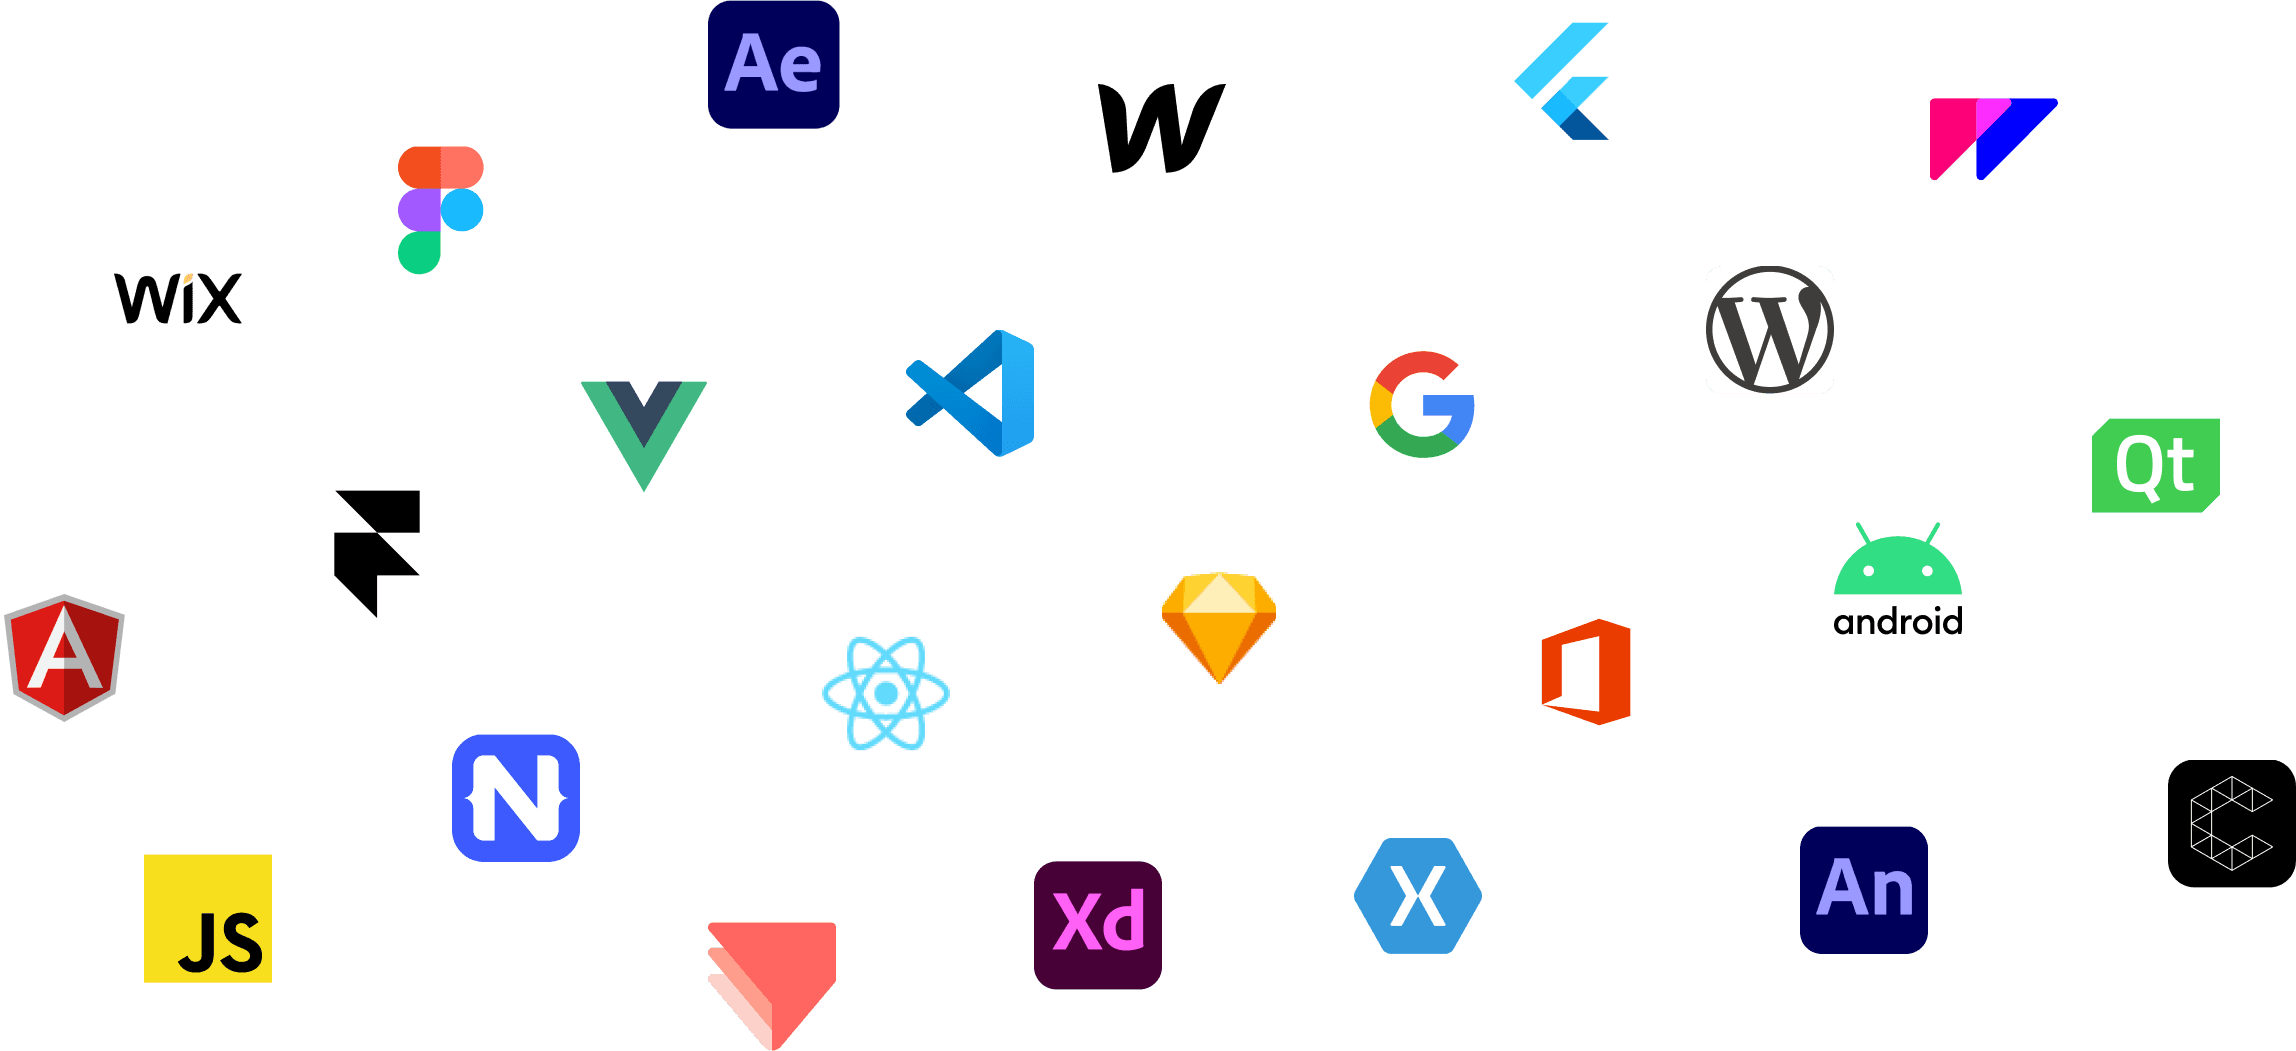 A collage of logos from various design, code and productivity companies